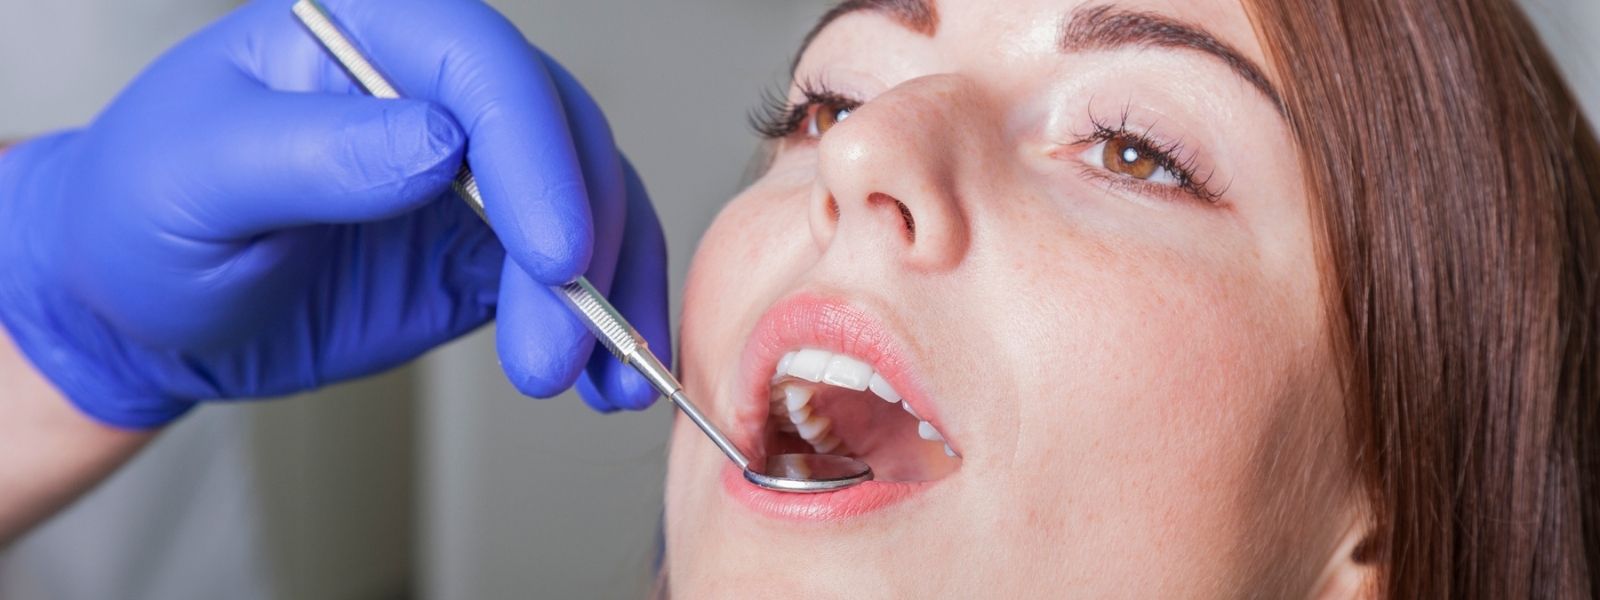 Examining a patient by a Dentist for a Root canal treatment